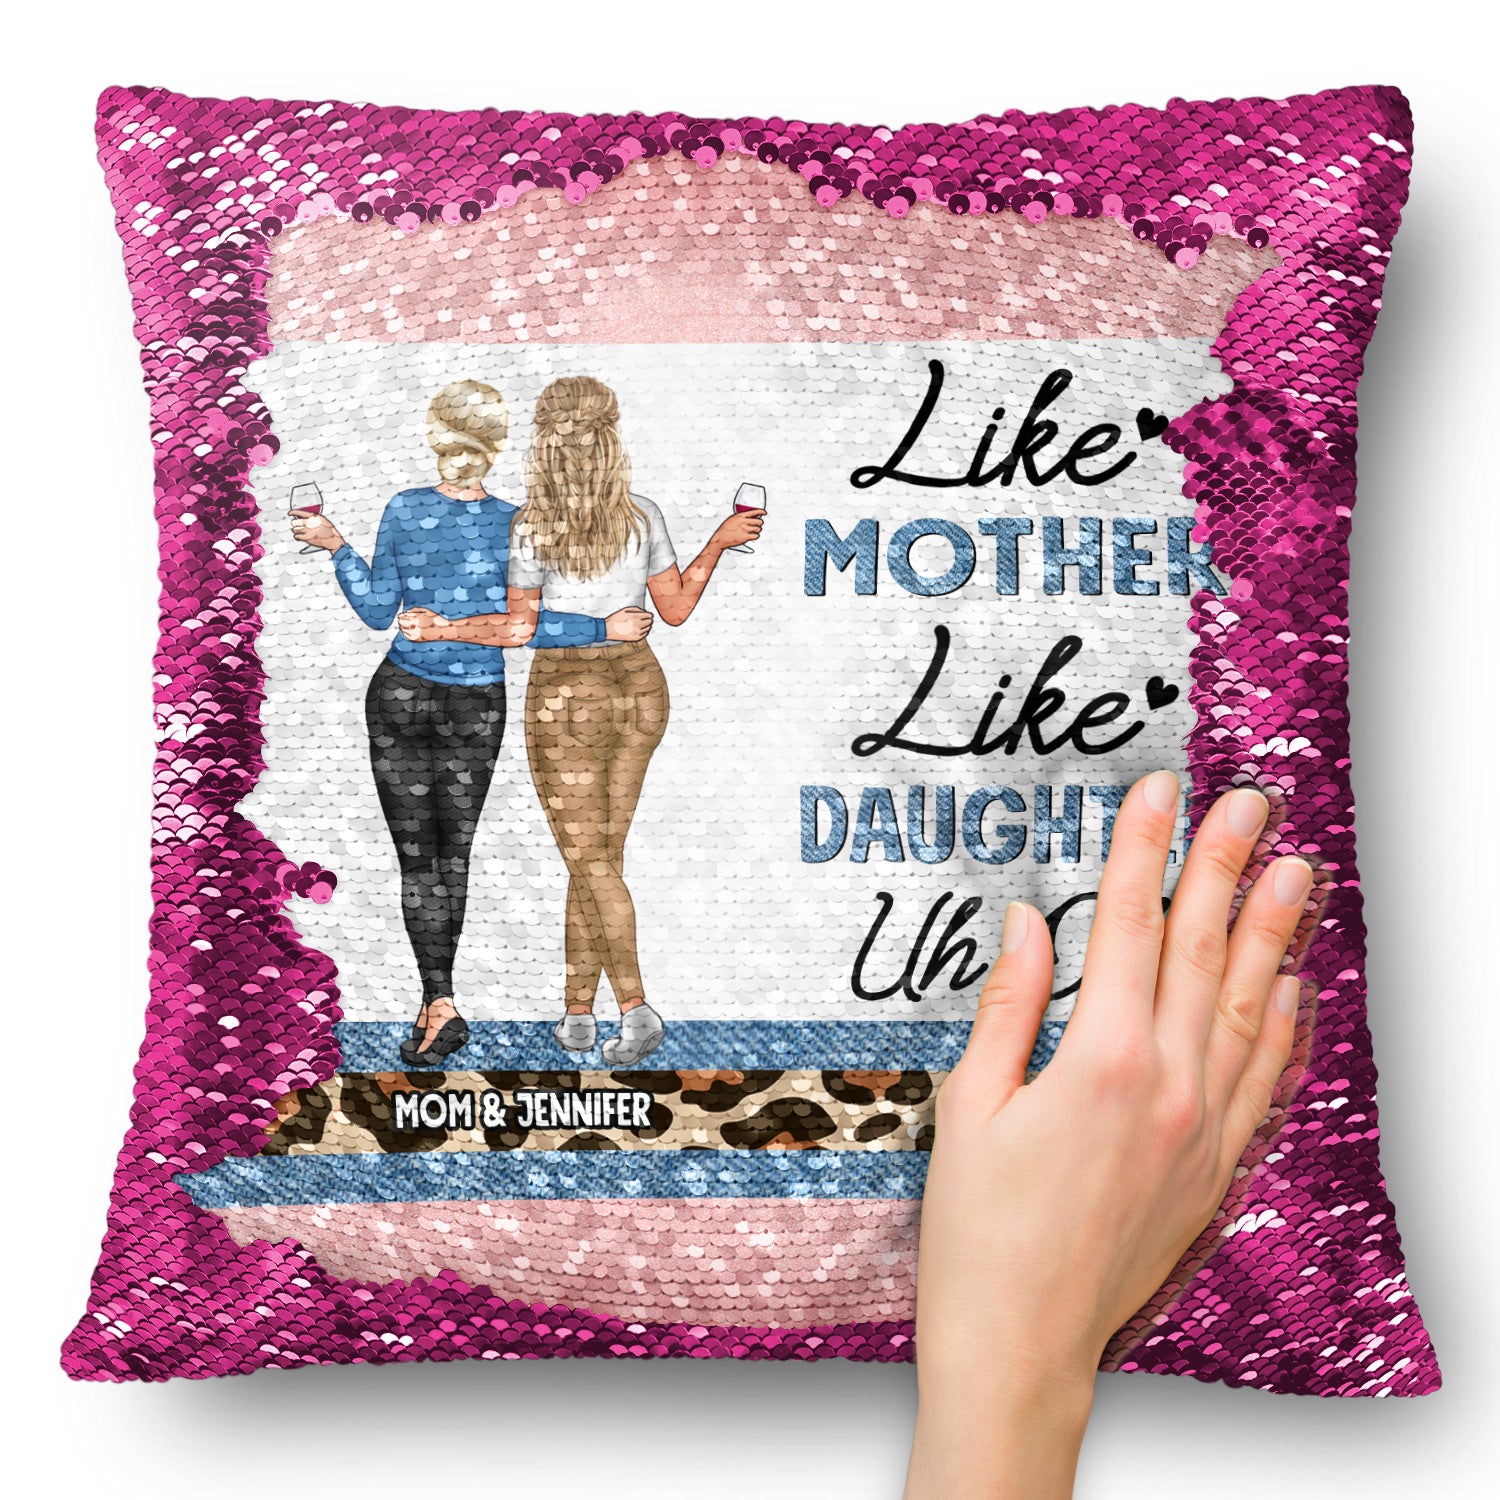 Like Mother Like Daughter Uh Oh - Gift For Mother - Personalized Sequin Pillow, Mermaid Sequin Cushion Magic Reversible Throw Pillow